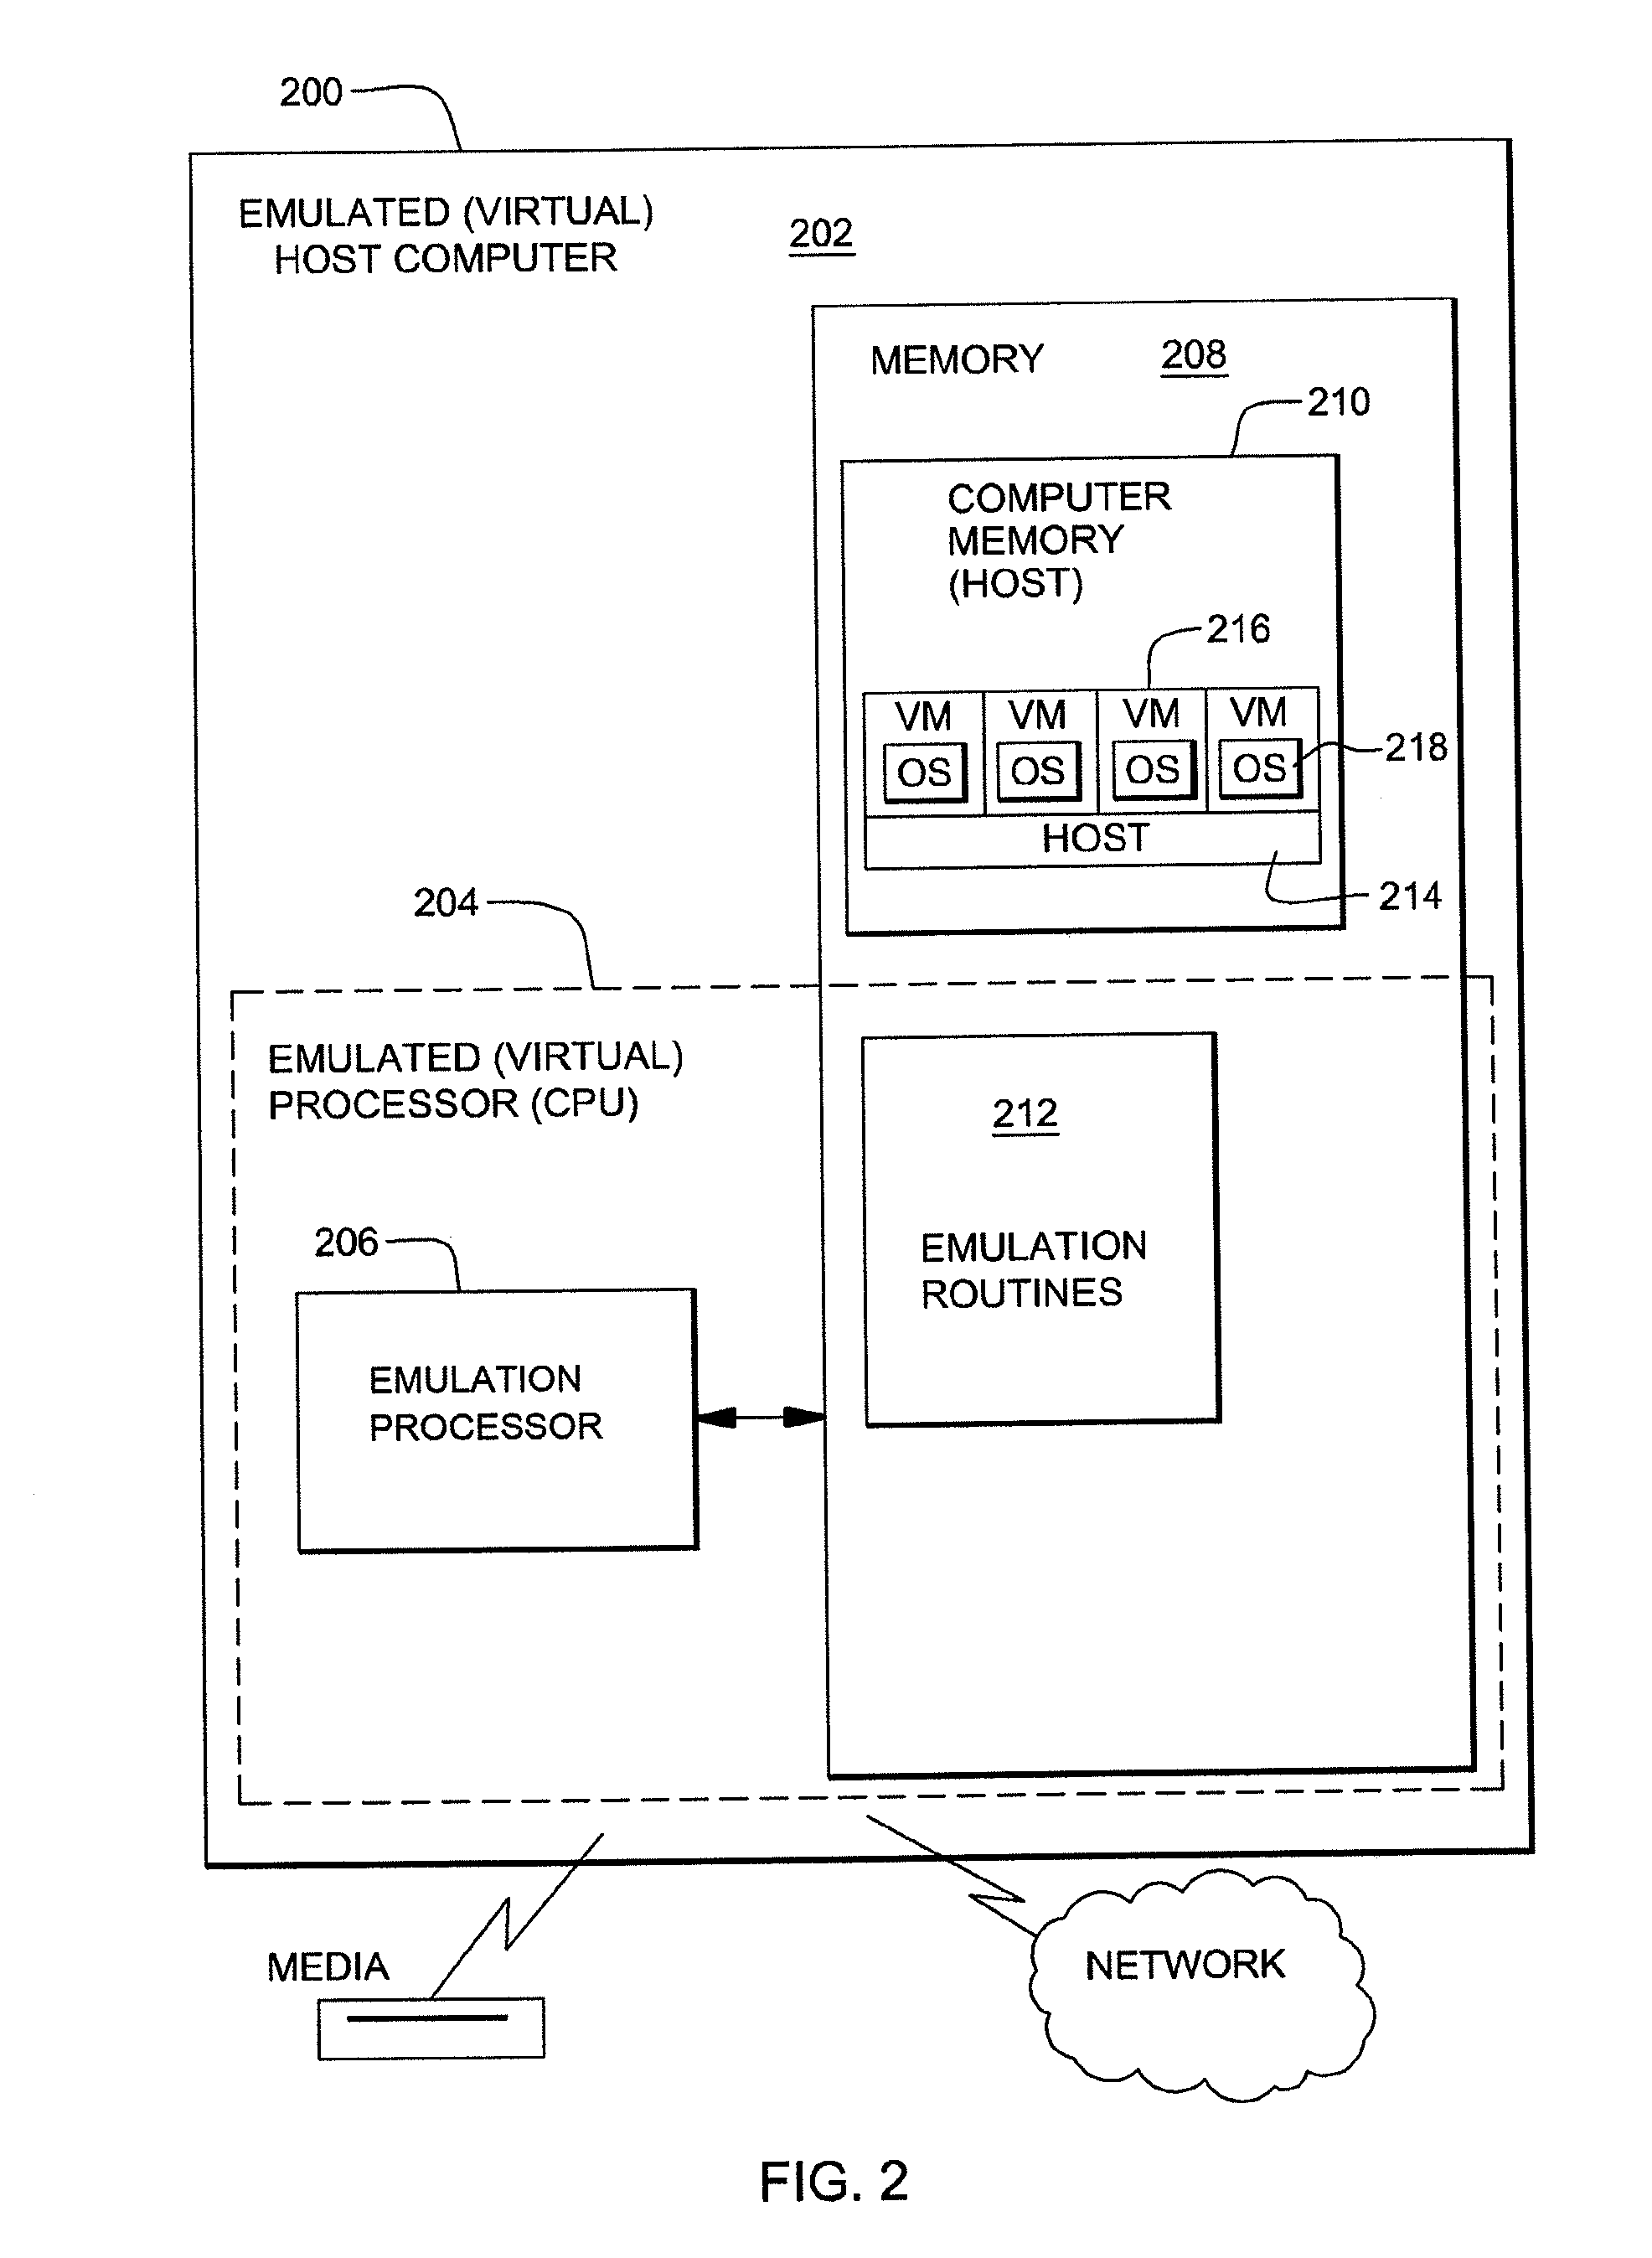 Managing use of storage by multiple pageable guests of a computing environment